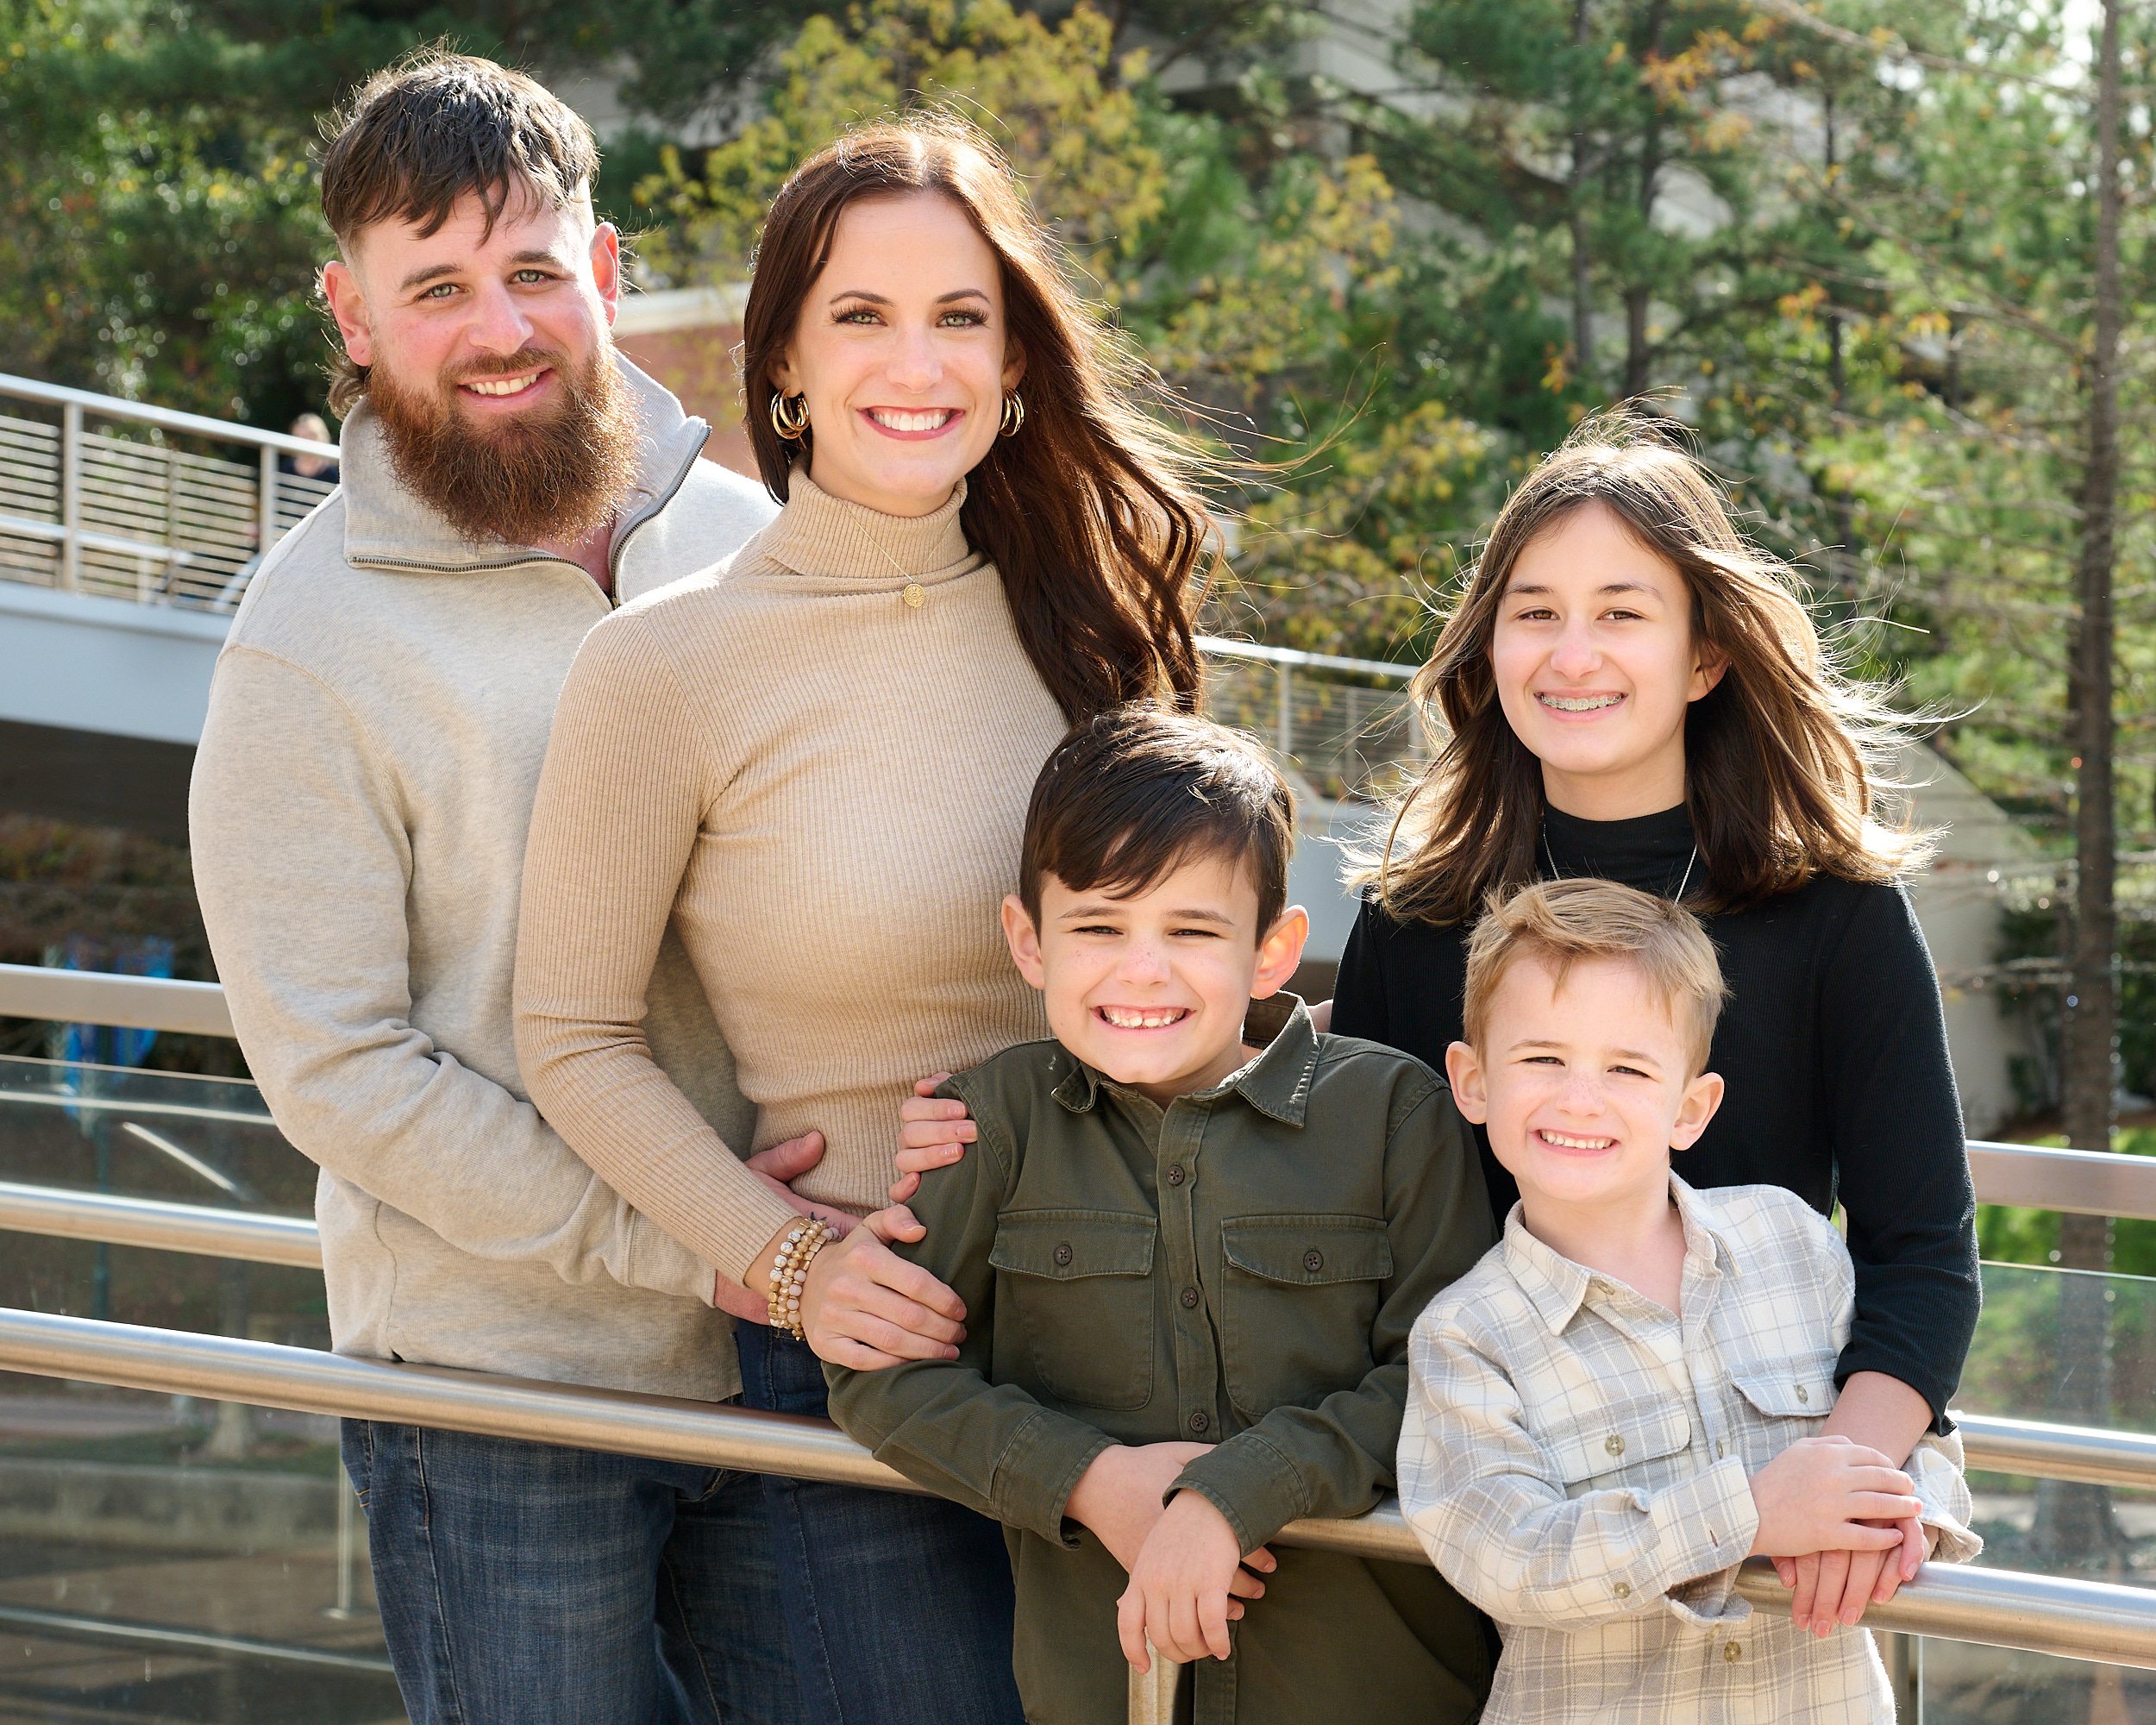  THE WOODLANDS, TEXAS - DECEMBER 2022: Katie Sikorski and her 12 family members are posing for annual Christmas cards on the embankment of The Woodlands Waterway. Fall foliage colors are still there. 